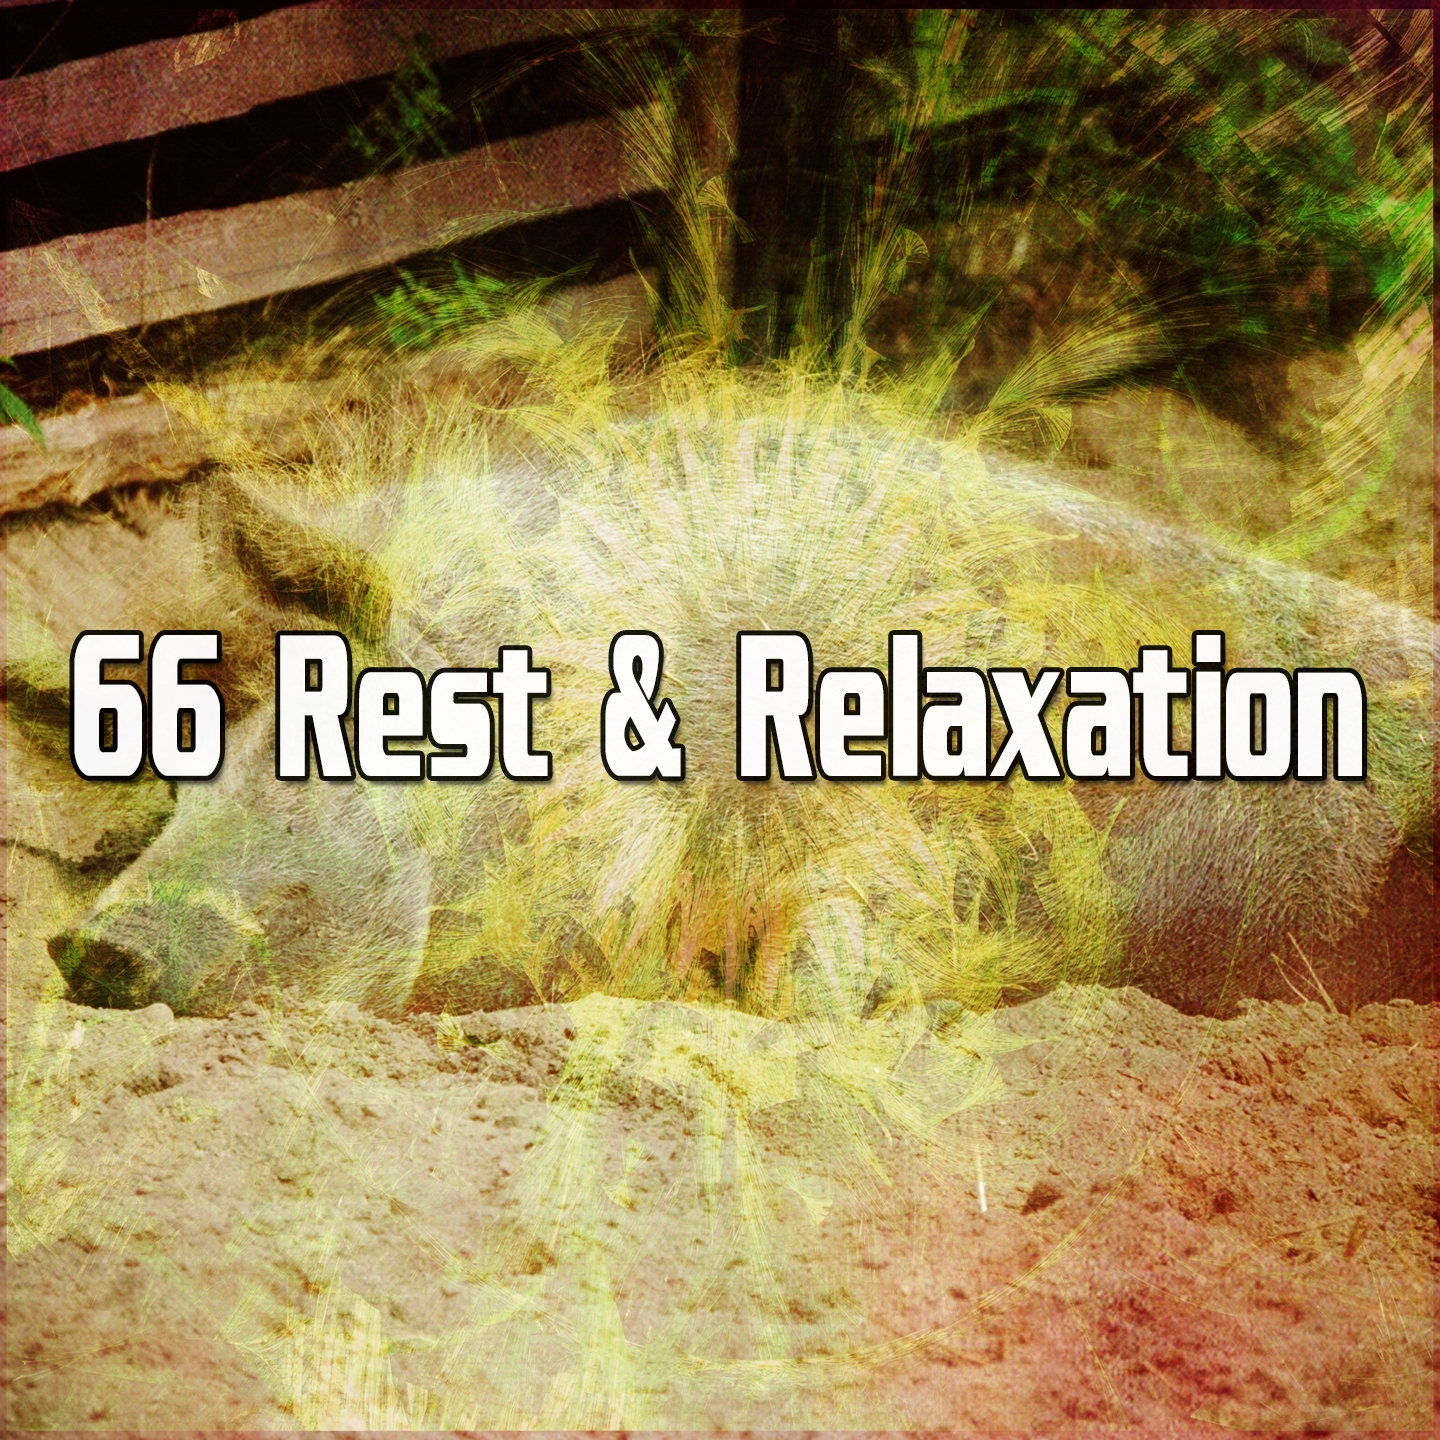 66 Rest & Relaxation